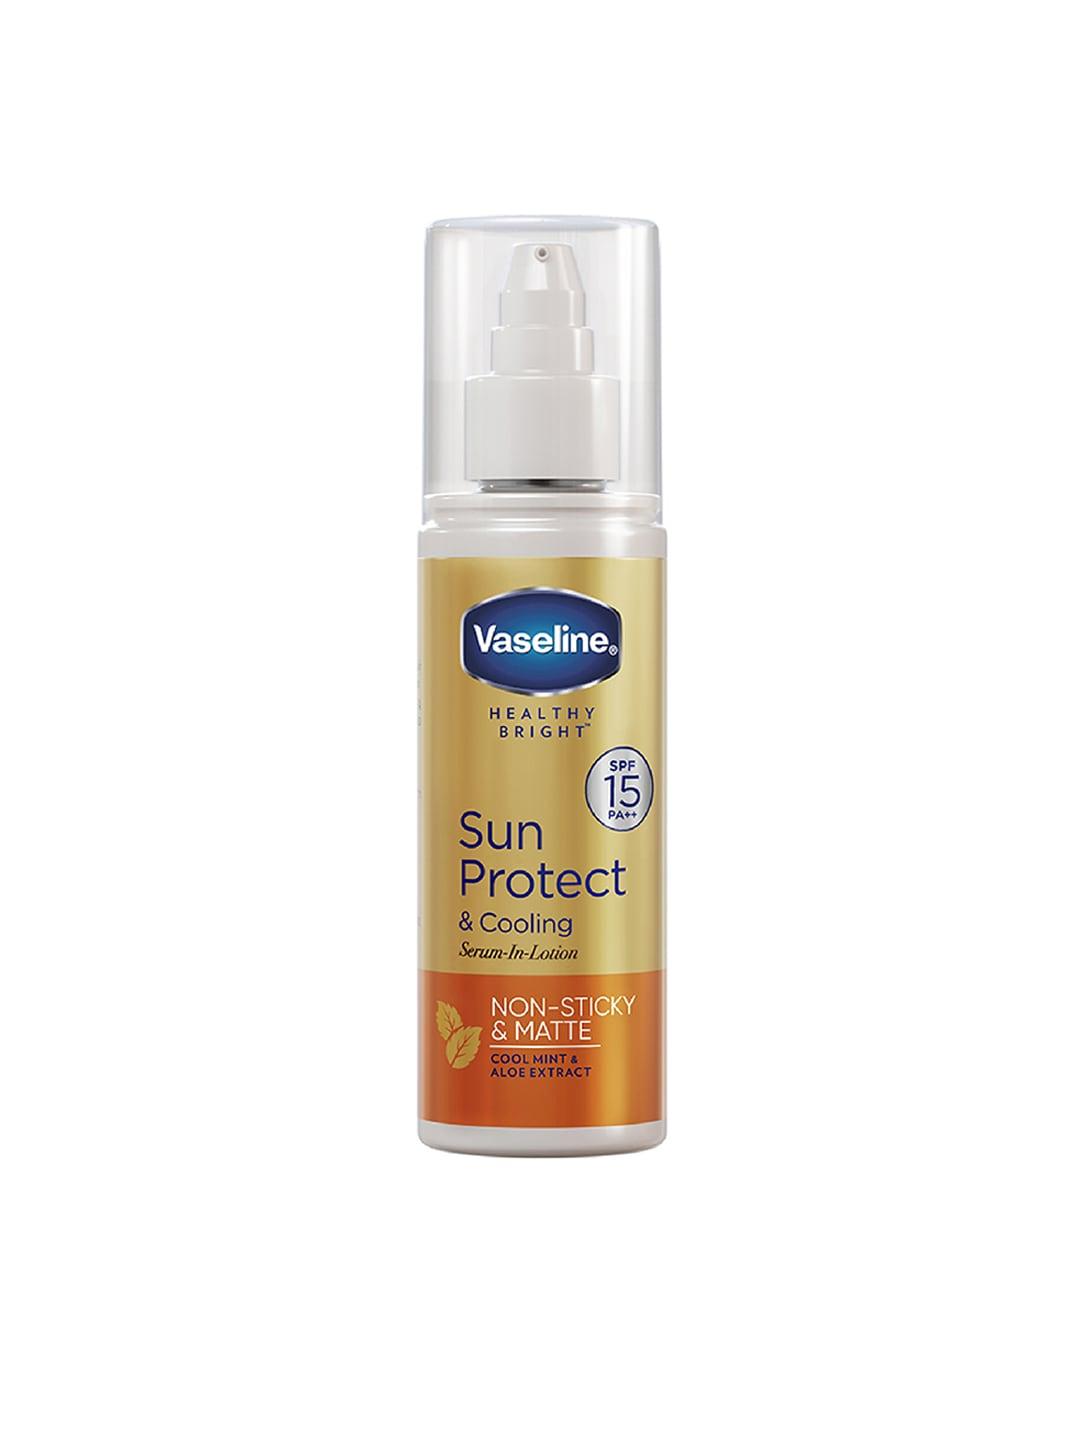 Vaseline Sun Protect & Cooling SPF 15 Body Serum Lotion with Mint & Aloe Extracts - 180ml